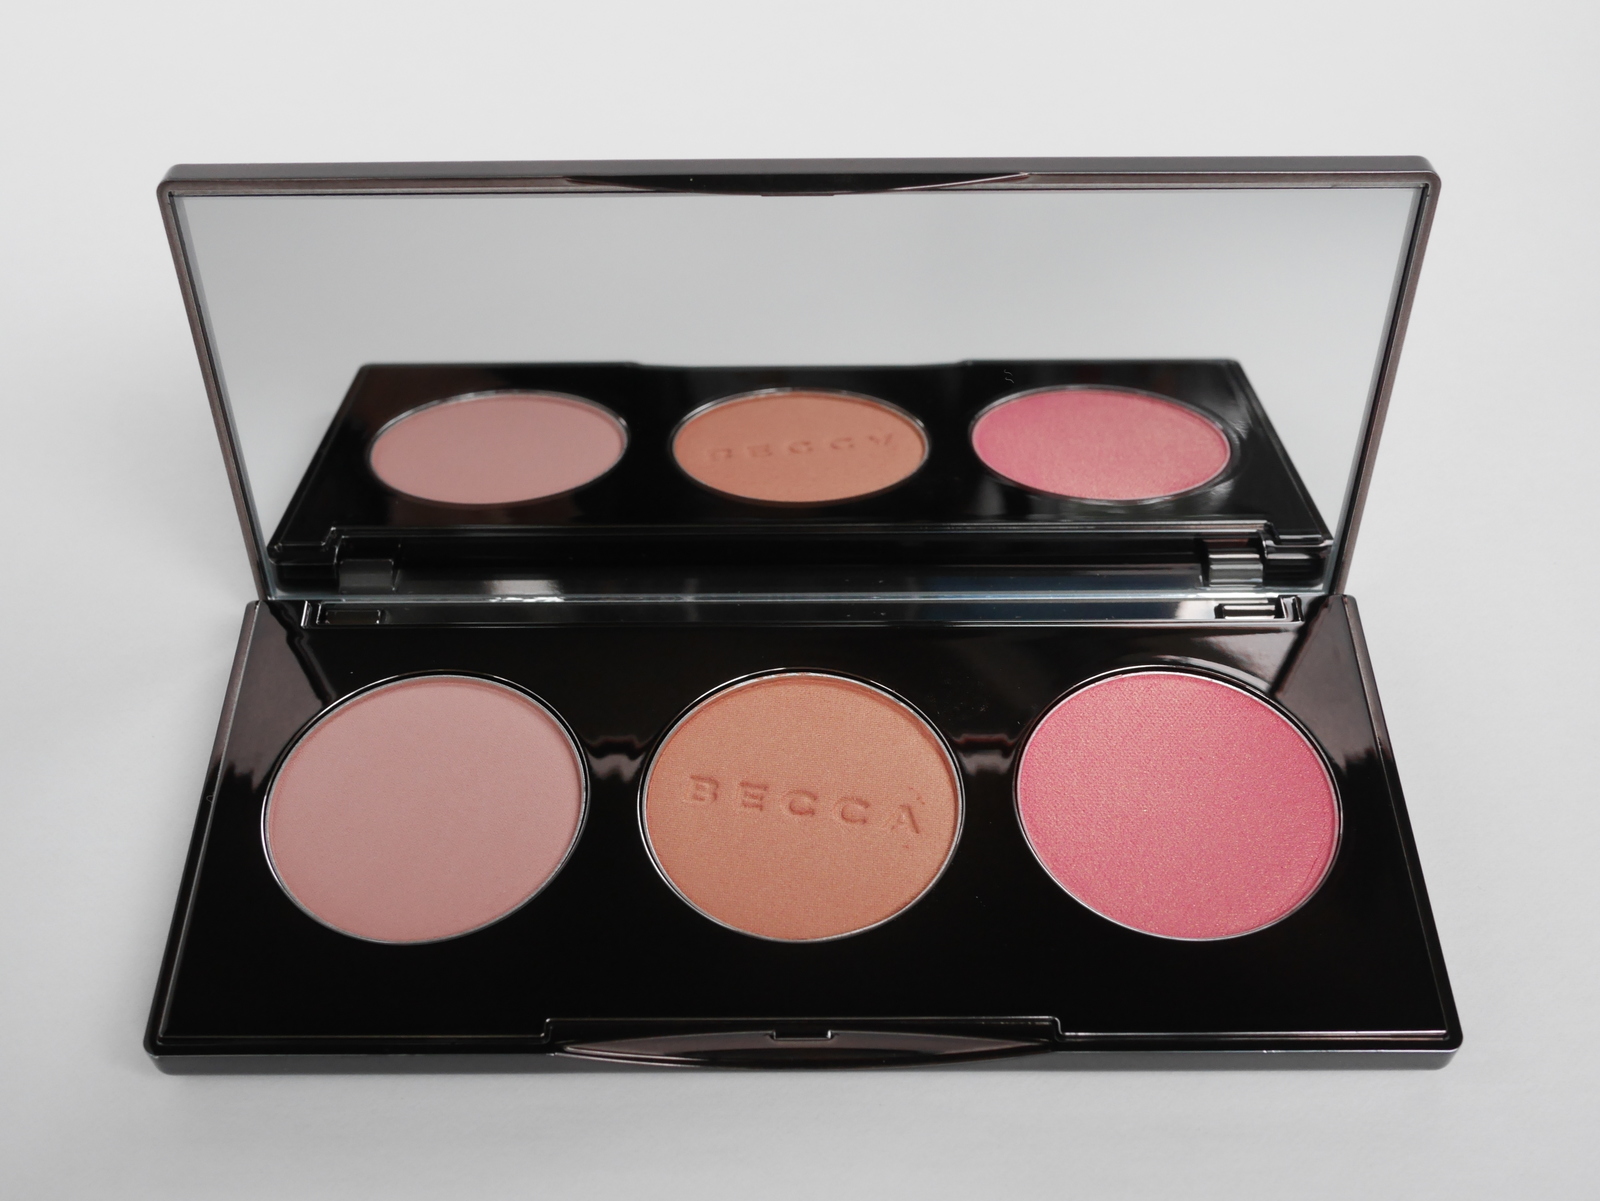 Becca Blushed with Light Palette - Blush Trio Palette - $42.00